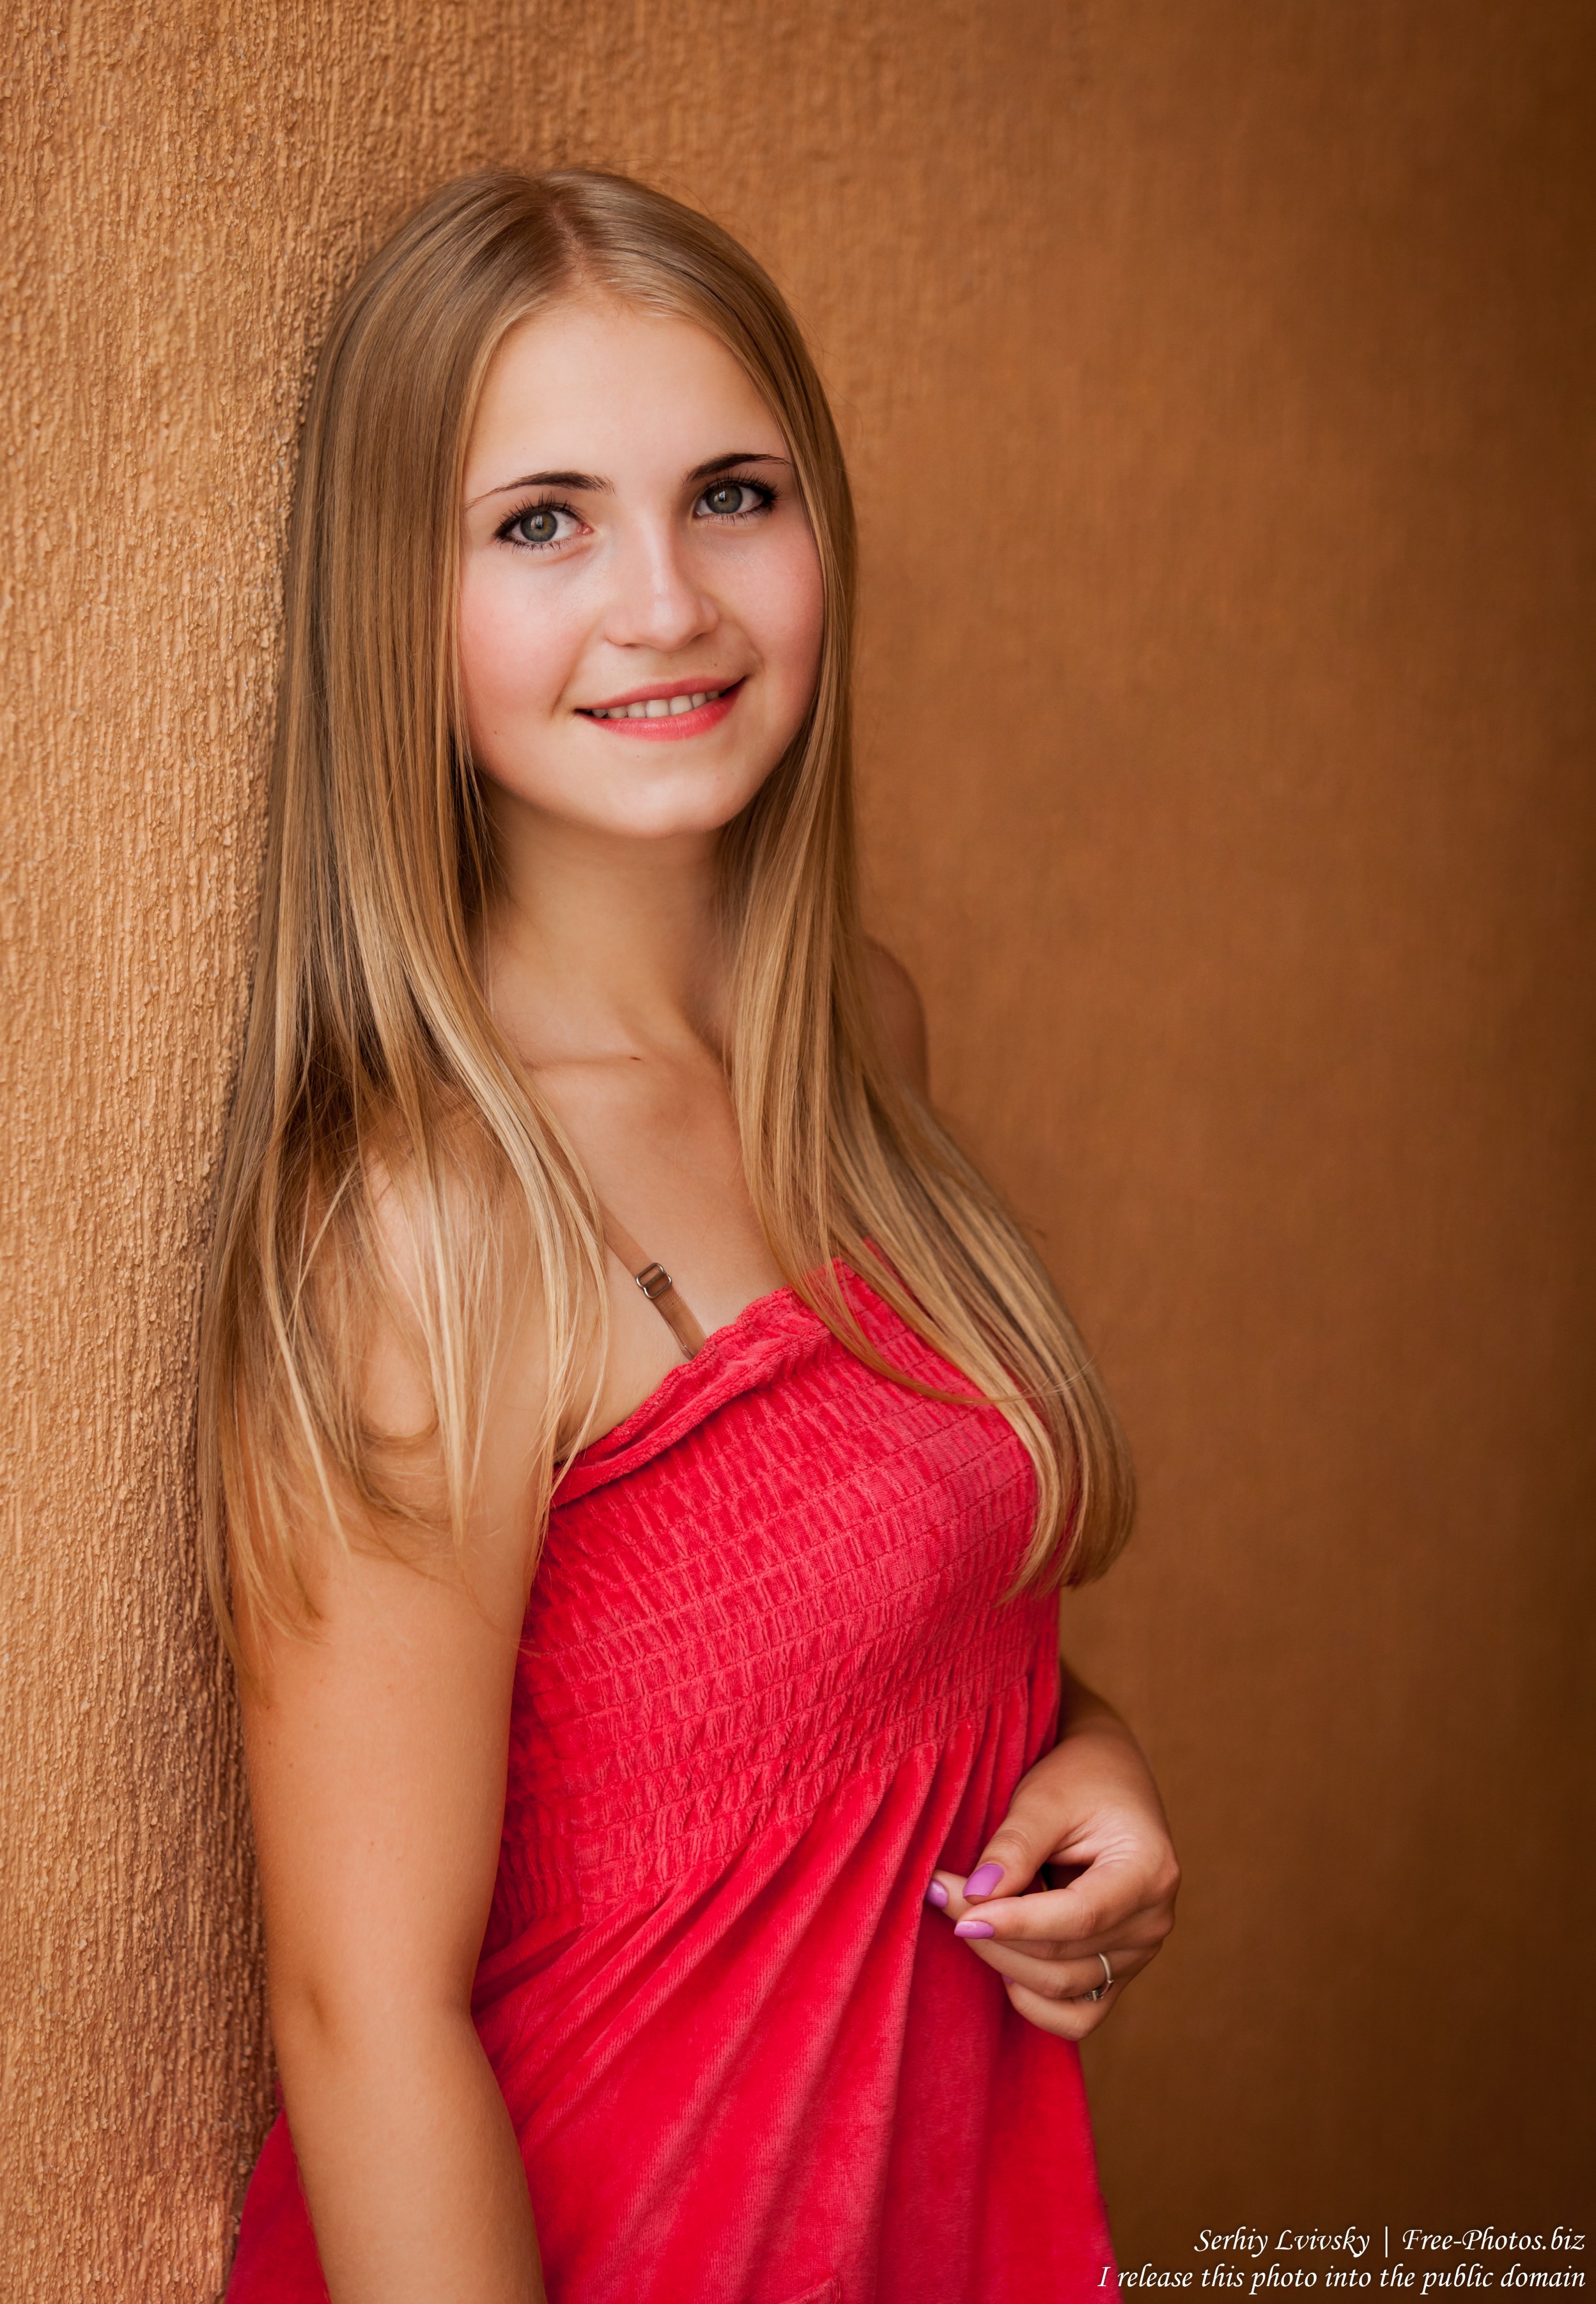 Photo Of A Catholic 19 Year Old Natural Blond Girl Photographed In August 2015 By Serhiy Lvivsky